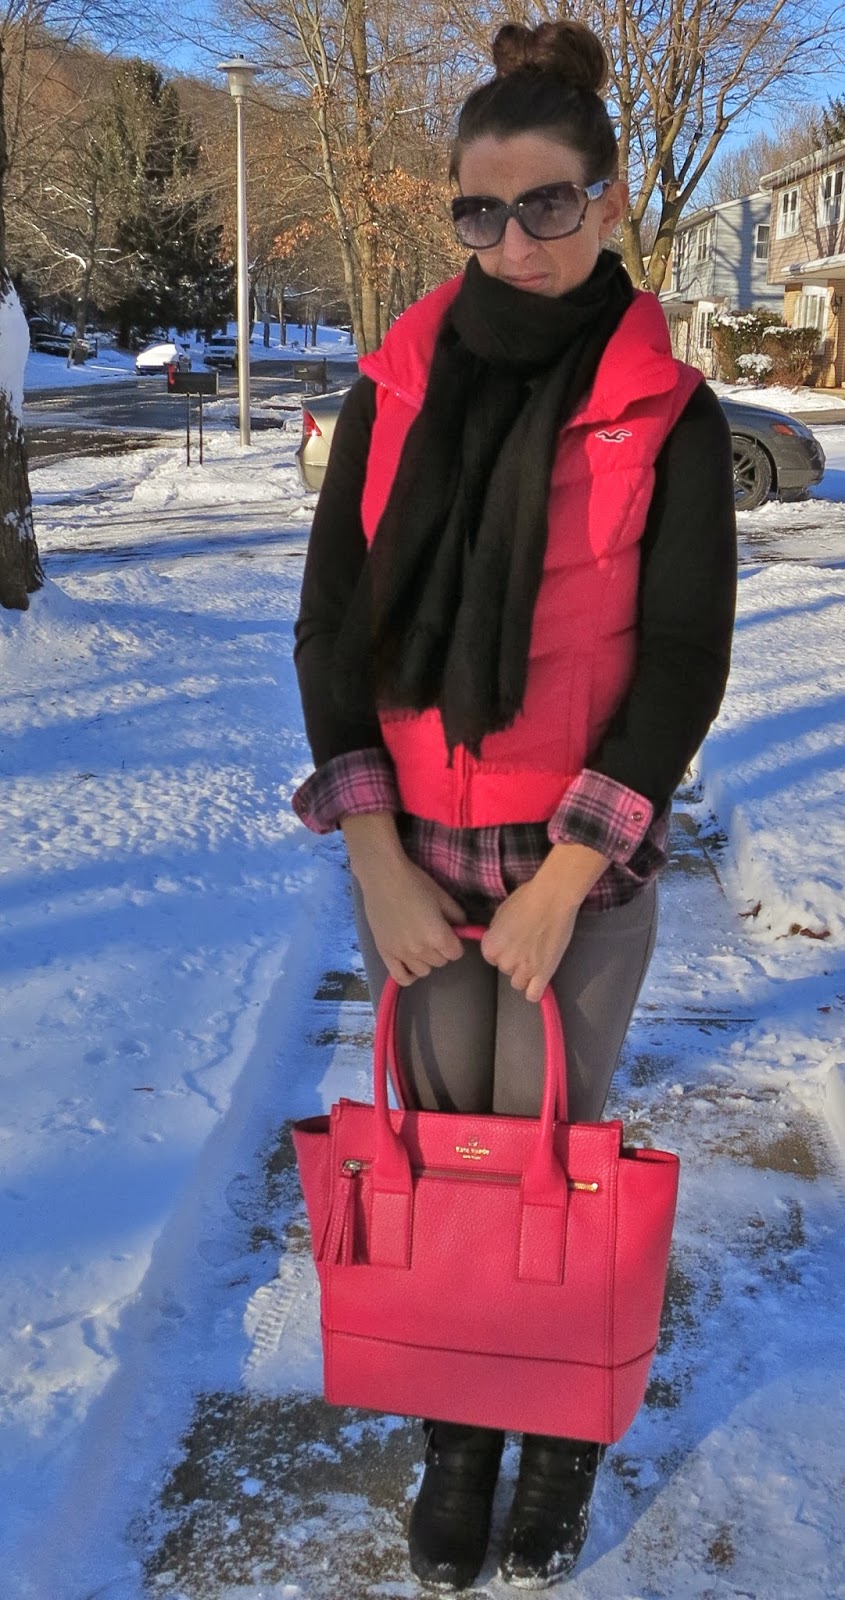 Fashion, ootd, Outfit Ideas, outfit of the day, Outfits, pink, winter fashion, kate spade bag